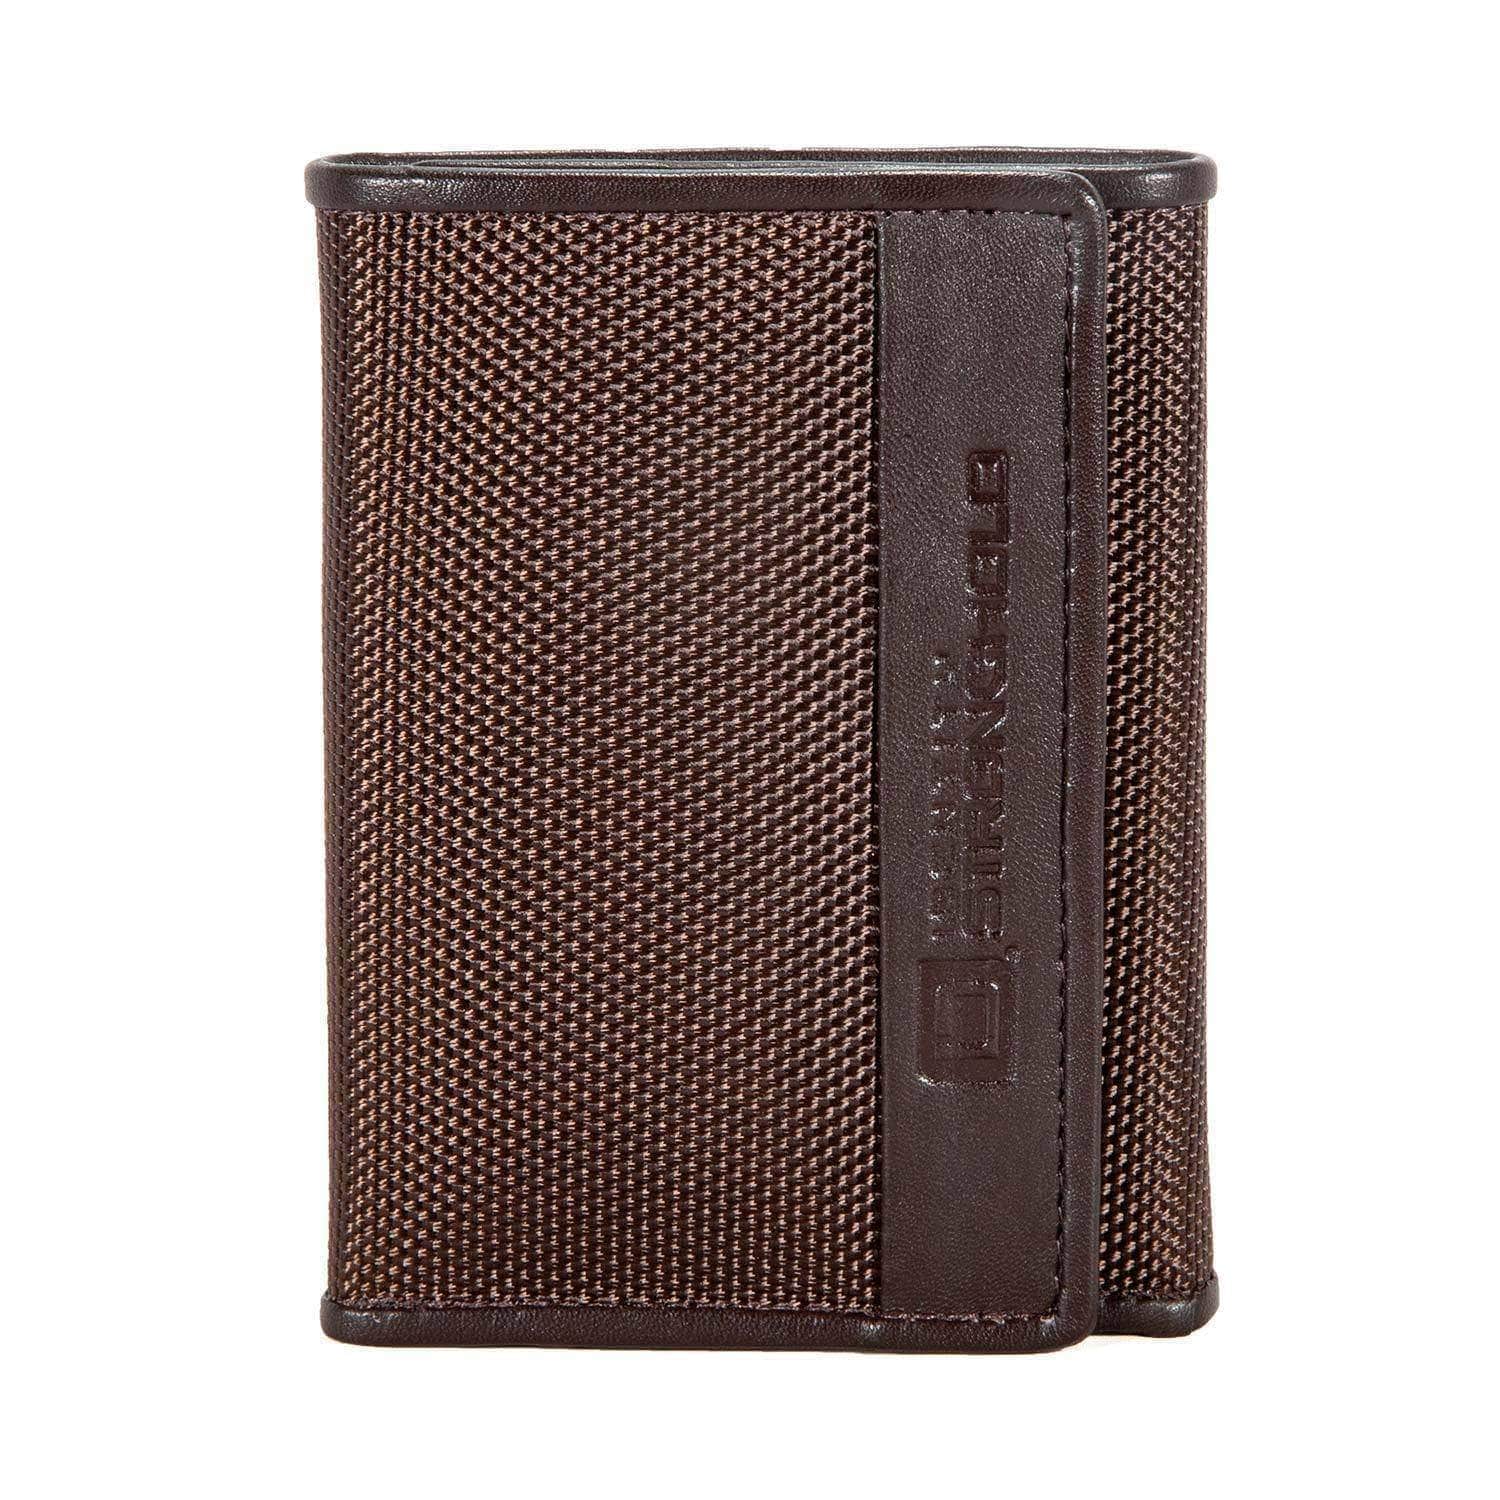 ID Stronghold Men's Wallet Dark brown Mens Slim RFID Trifold Wallet with ID in Leather and Nylon